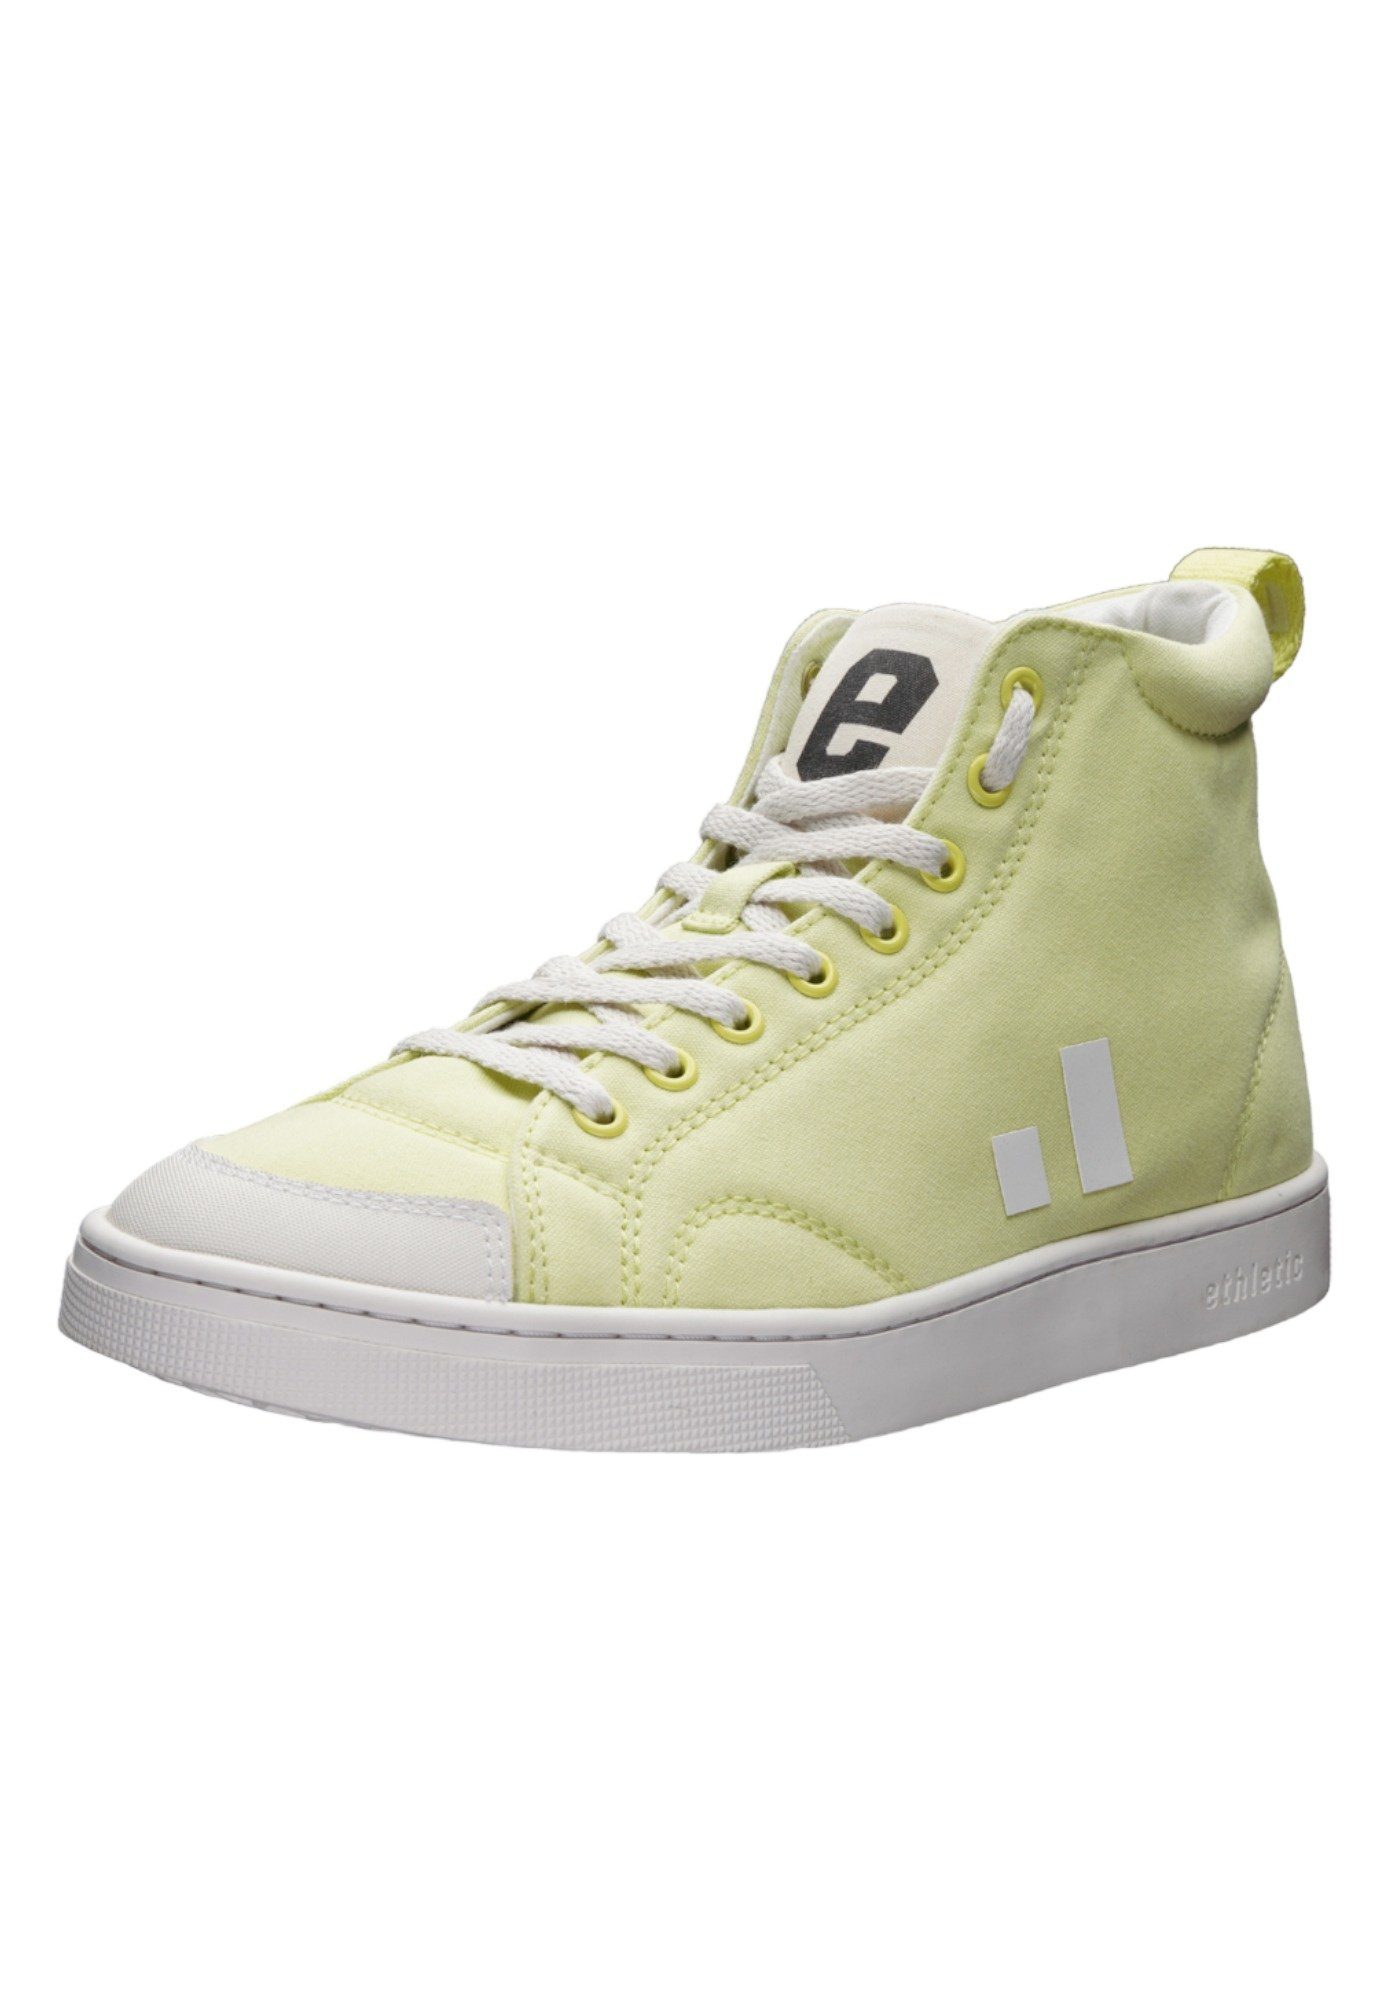 Just Fairtrade Produkt Yellow Lime Hi Cut Active - White Sneaker ETHLETIC